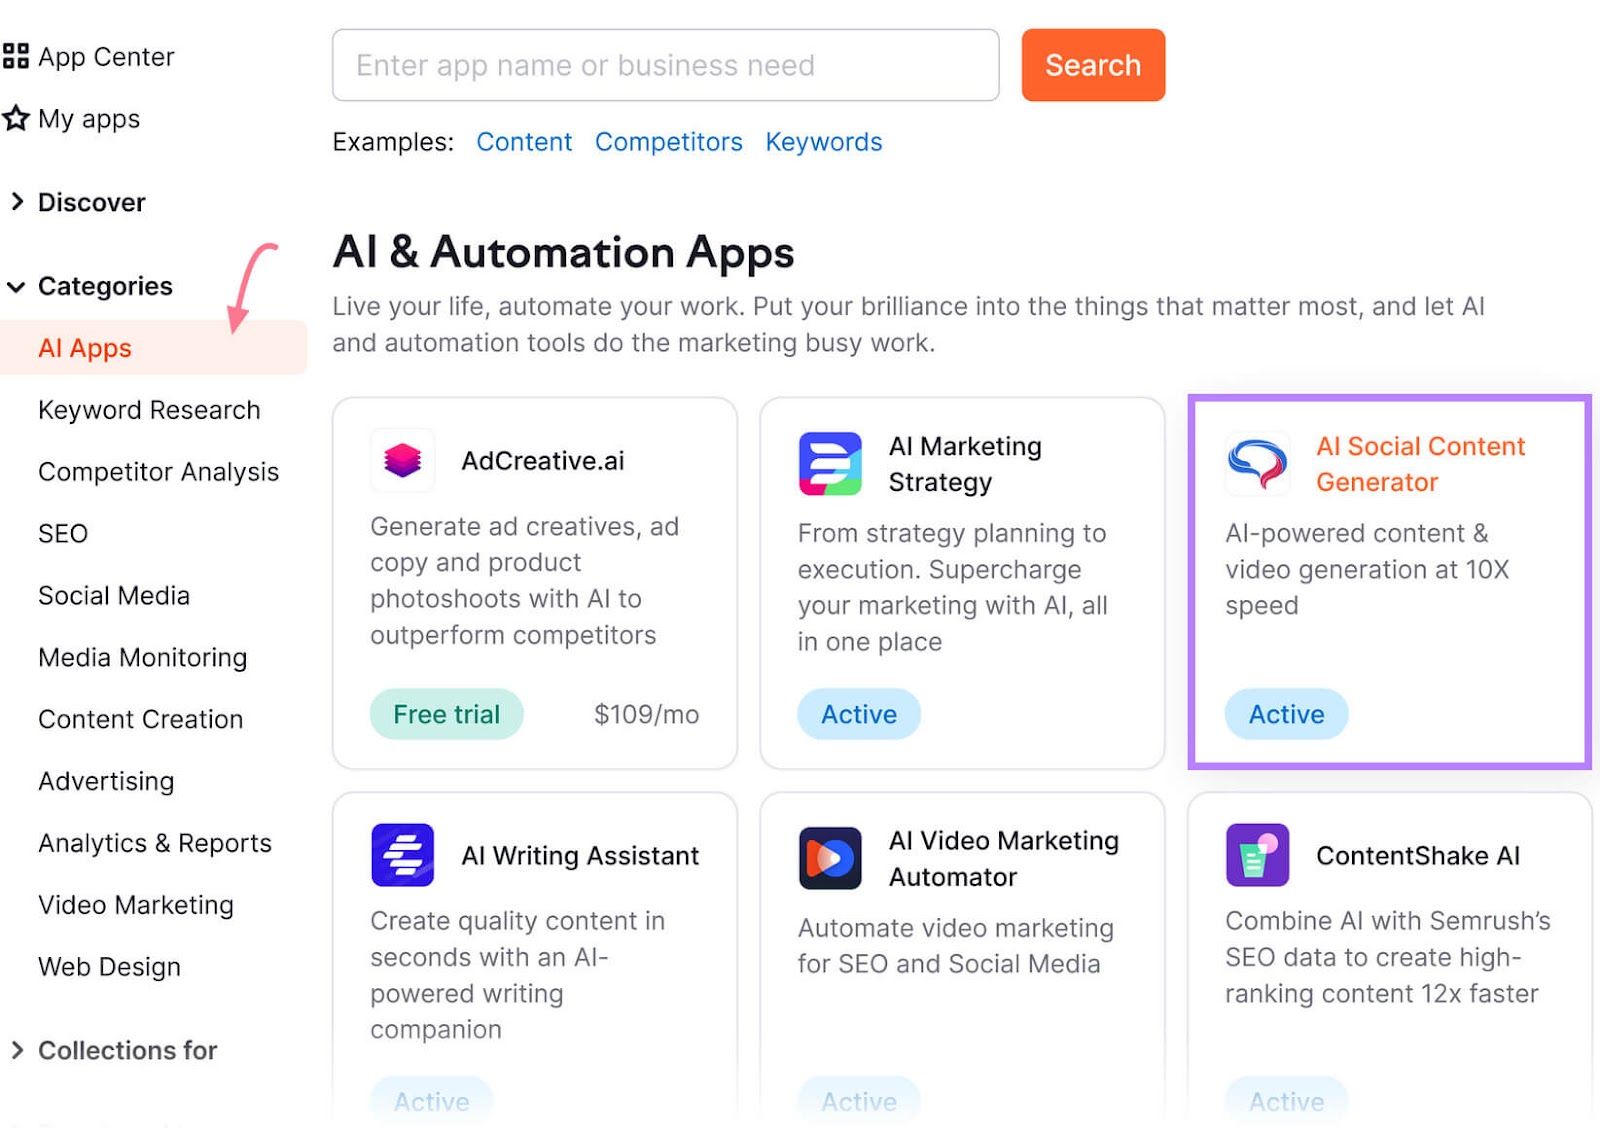 AI & Automation Apps section in the App Center with "AI Social Content Generator" highlighted in a purple box.